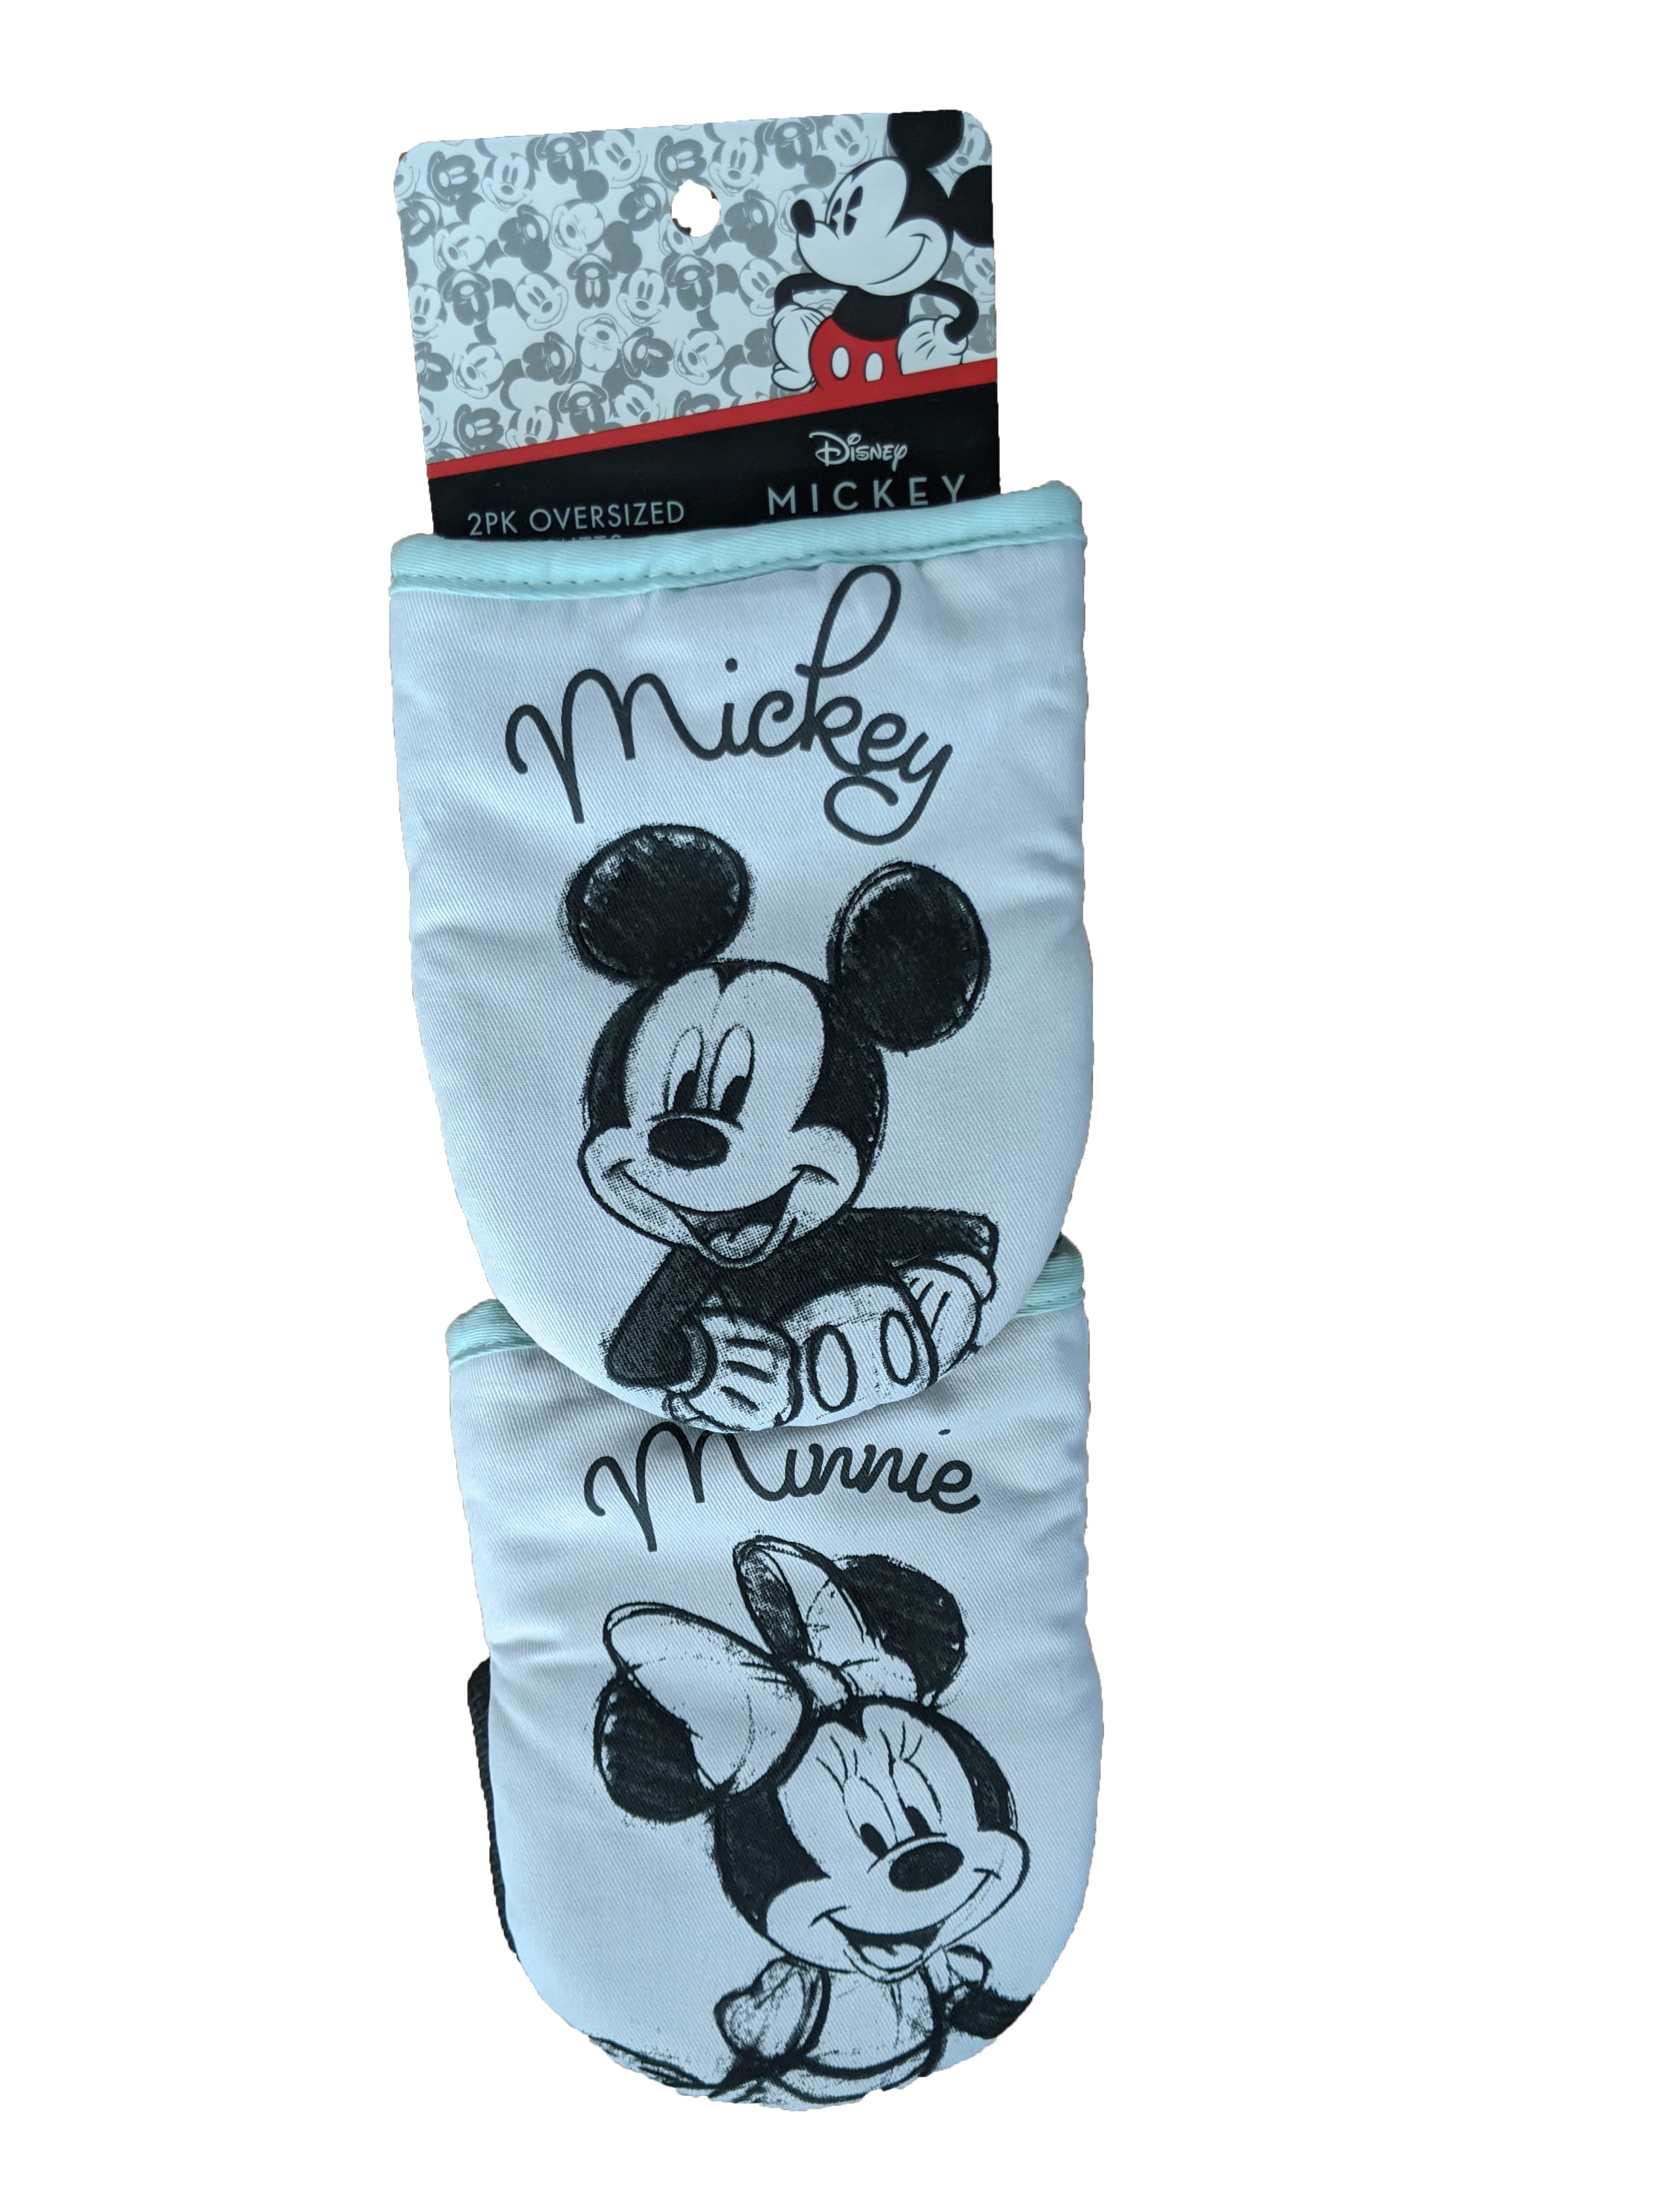 Disney MICKEY MINNIE MOUSE 2-Pack Oversized Heat Resistant Oven Mitts Pot Holder 